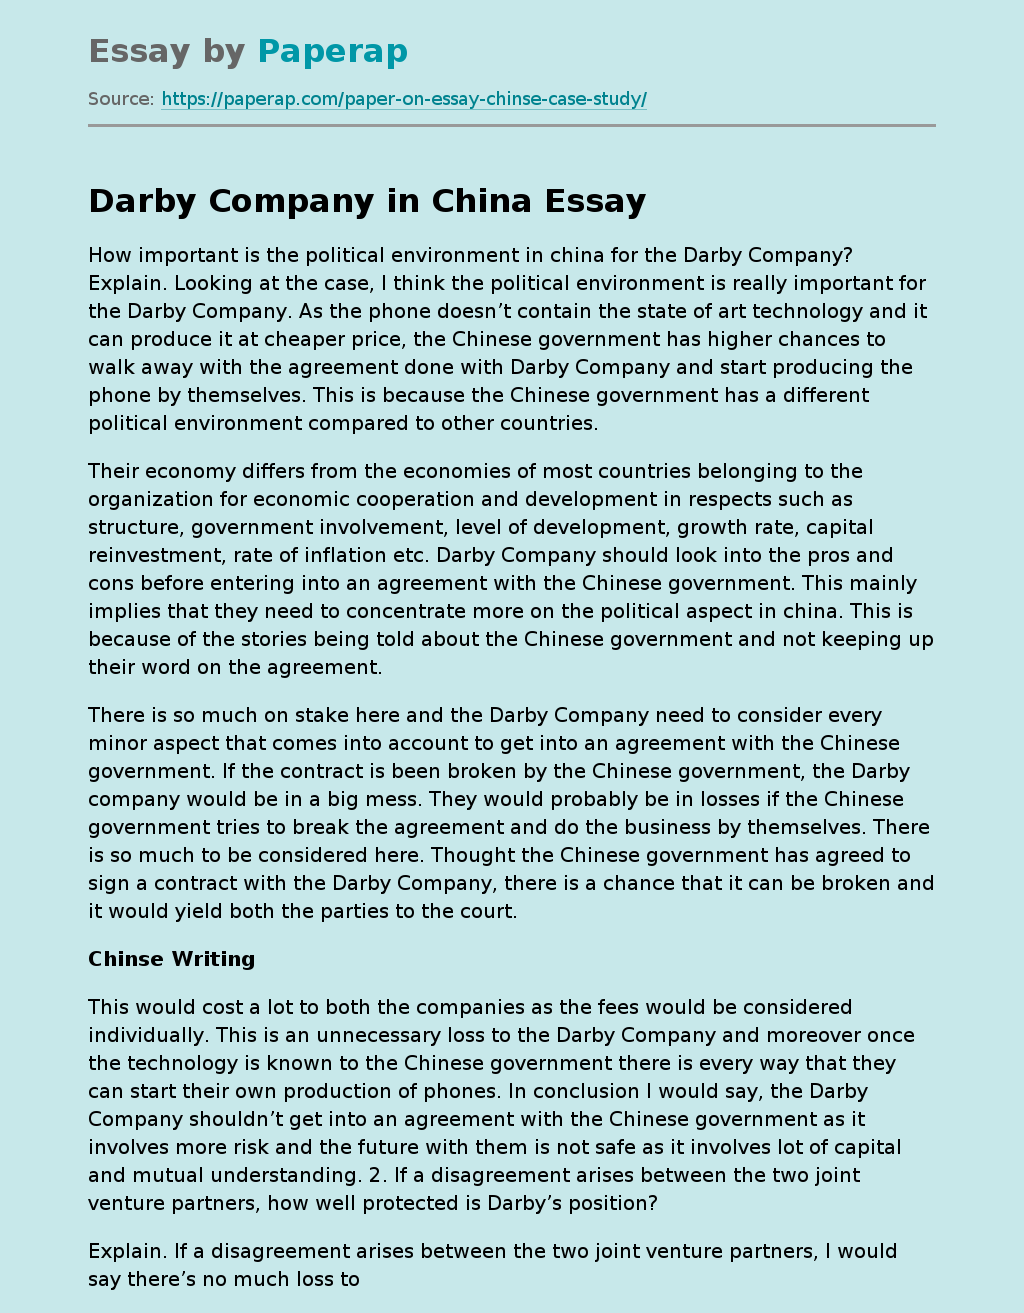 Political Environment in China for Darby